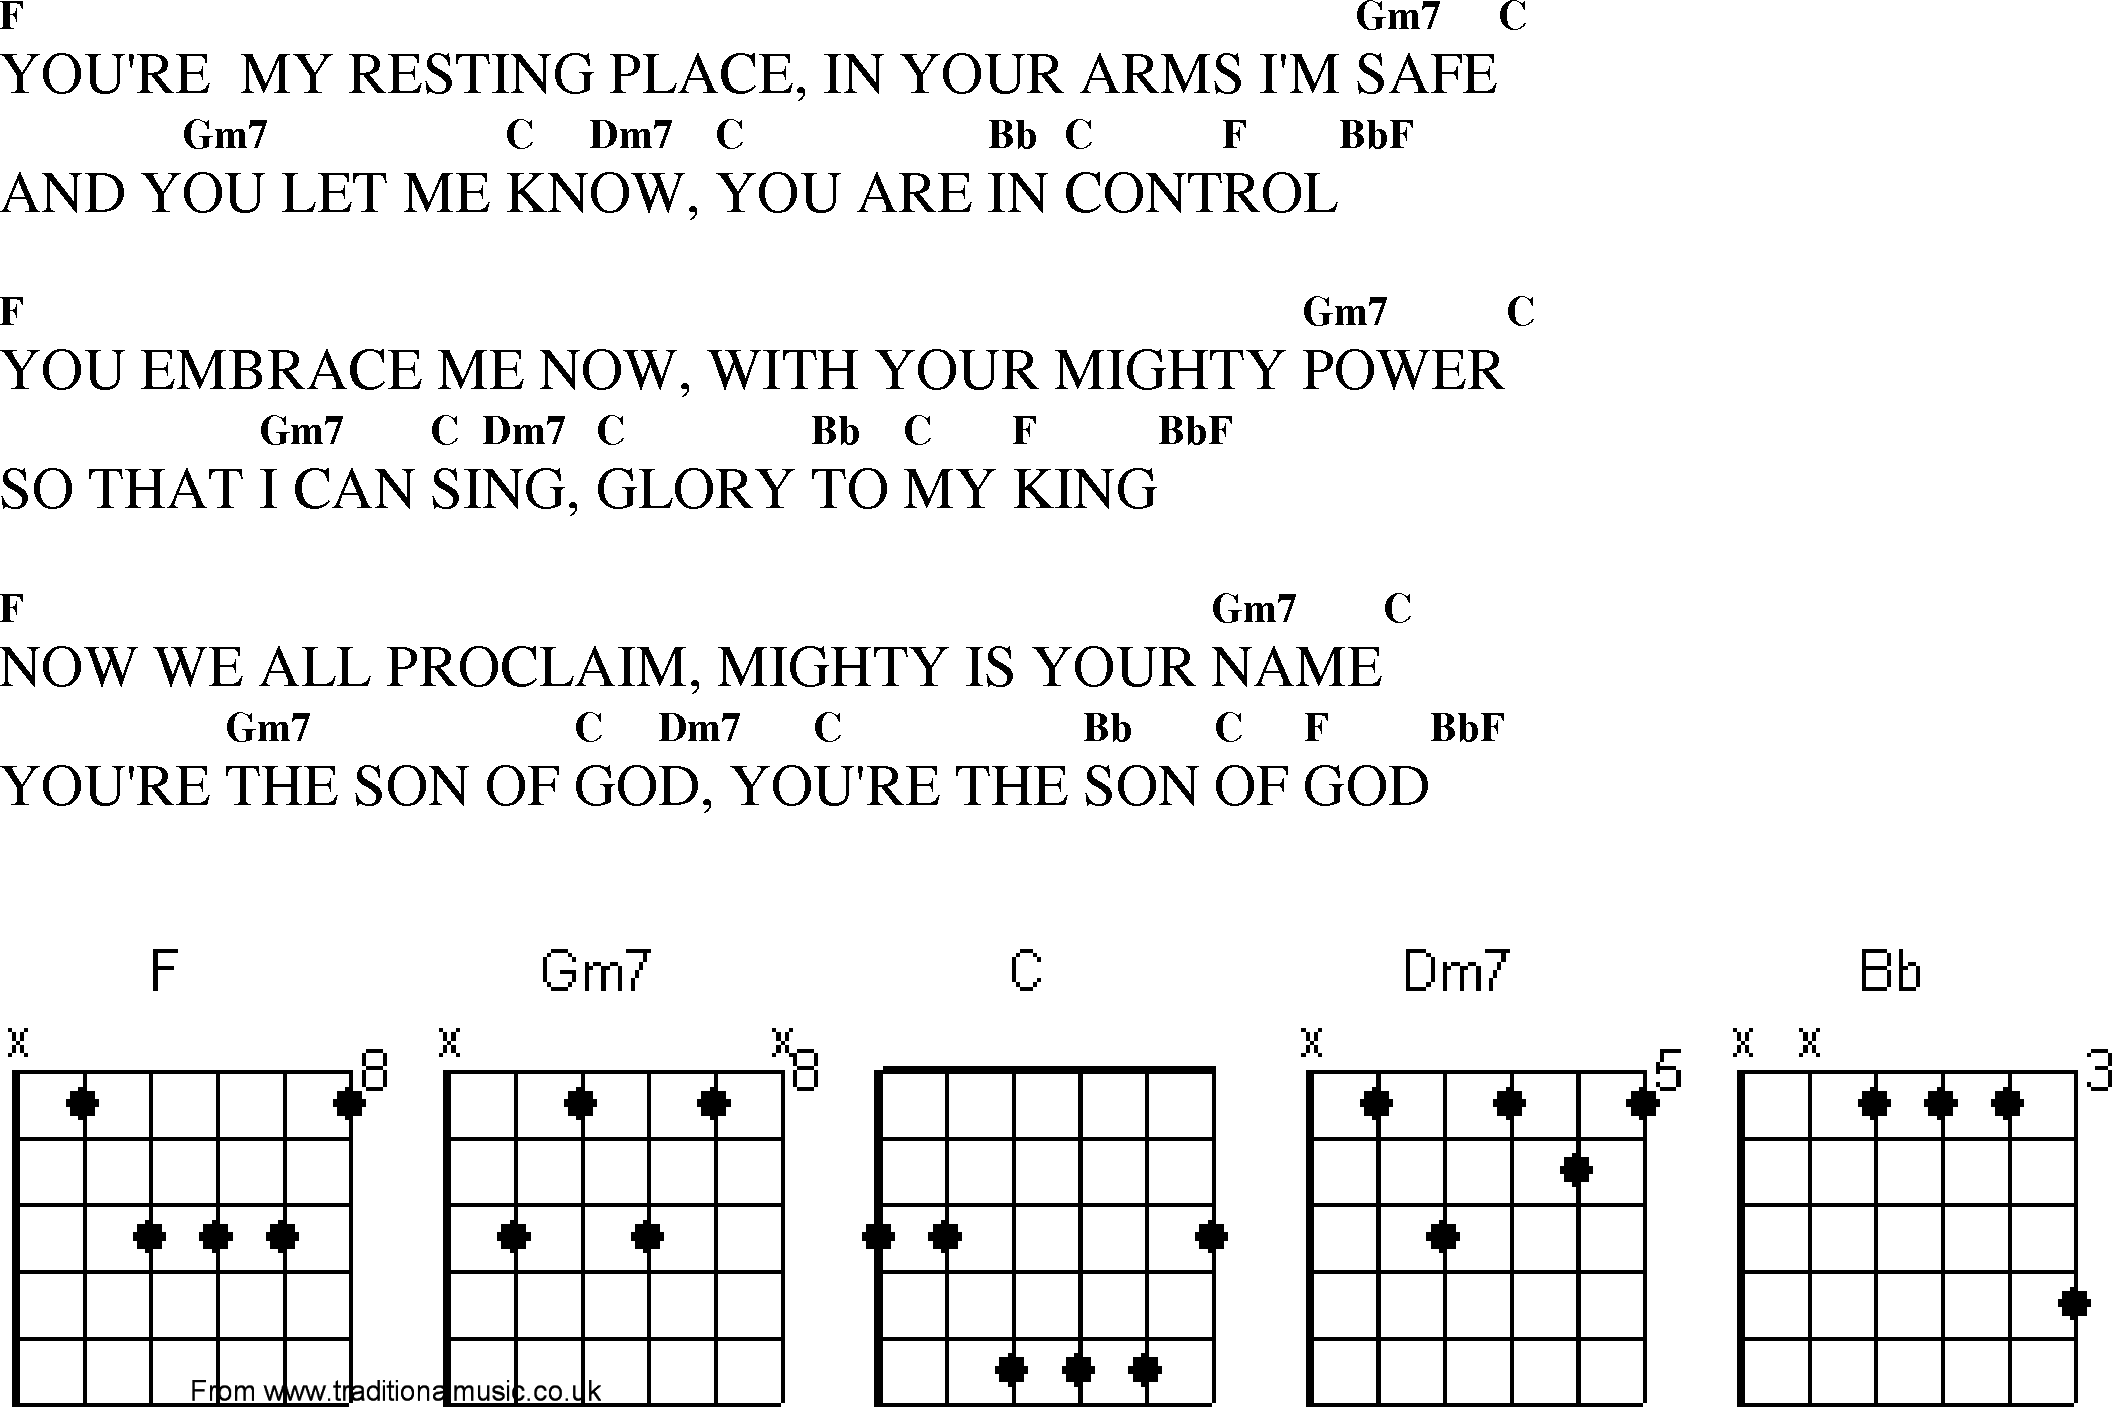 Gospel Song: youre_my_resting_plce, lyrics and chords.